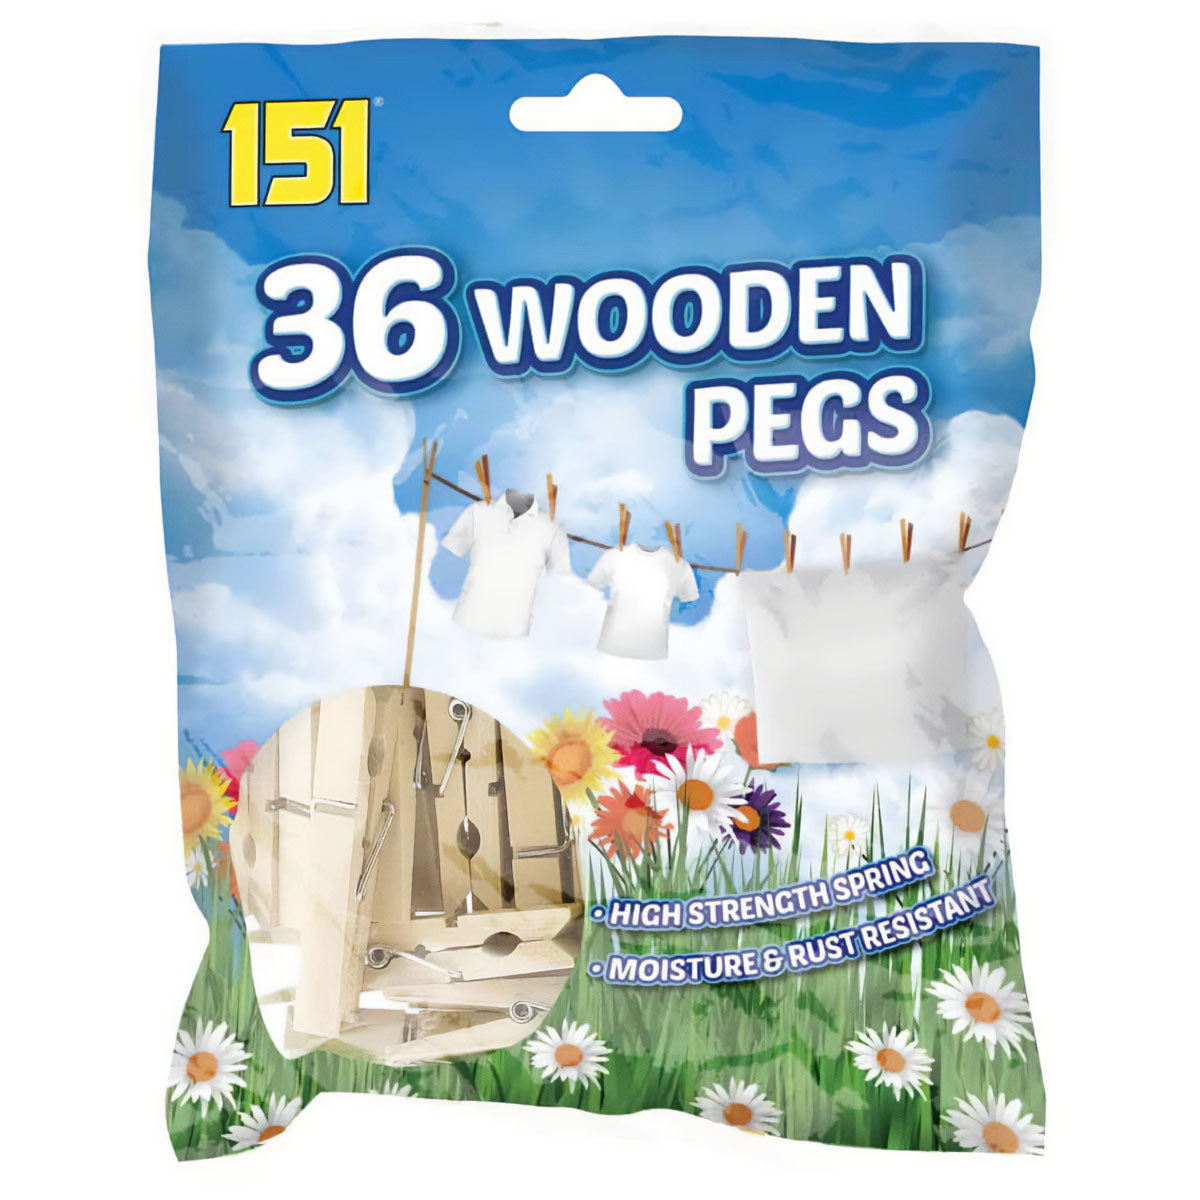 151 - Wooden Pegs - 36 Pack - Continental Food Store